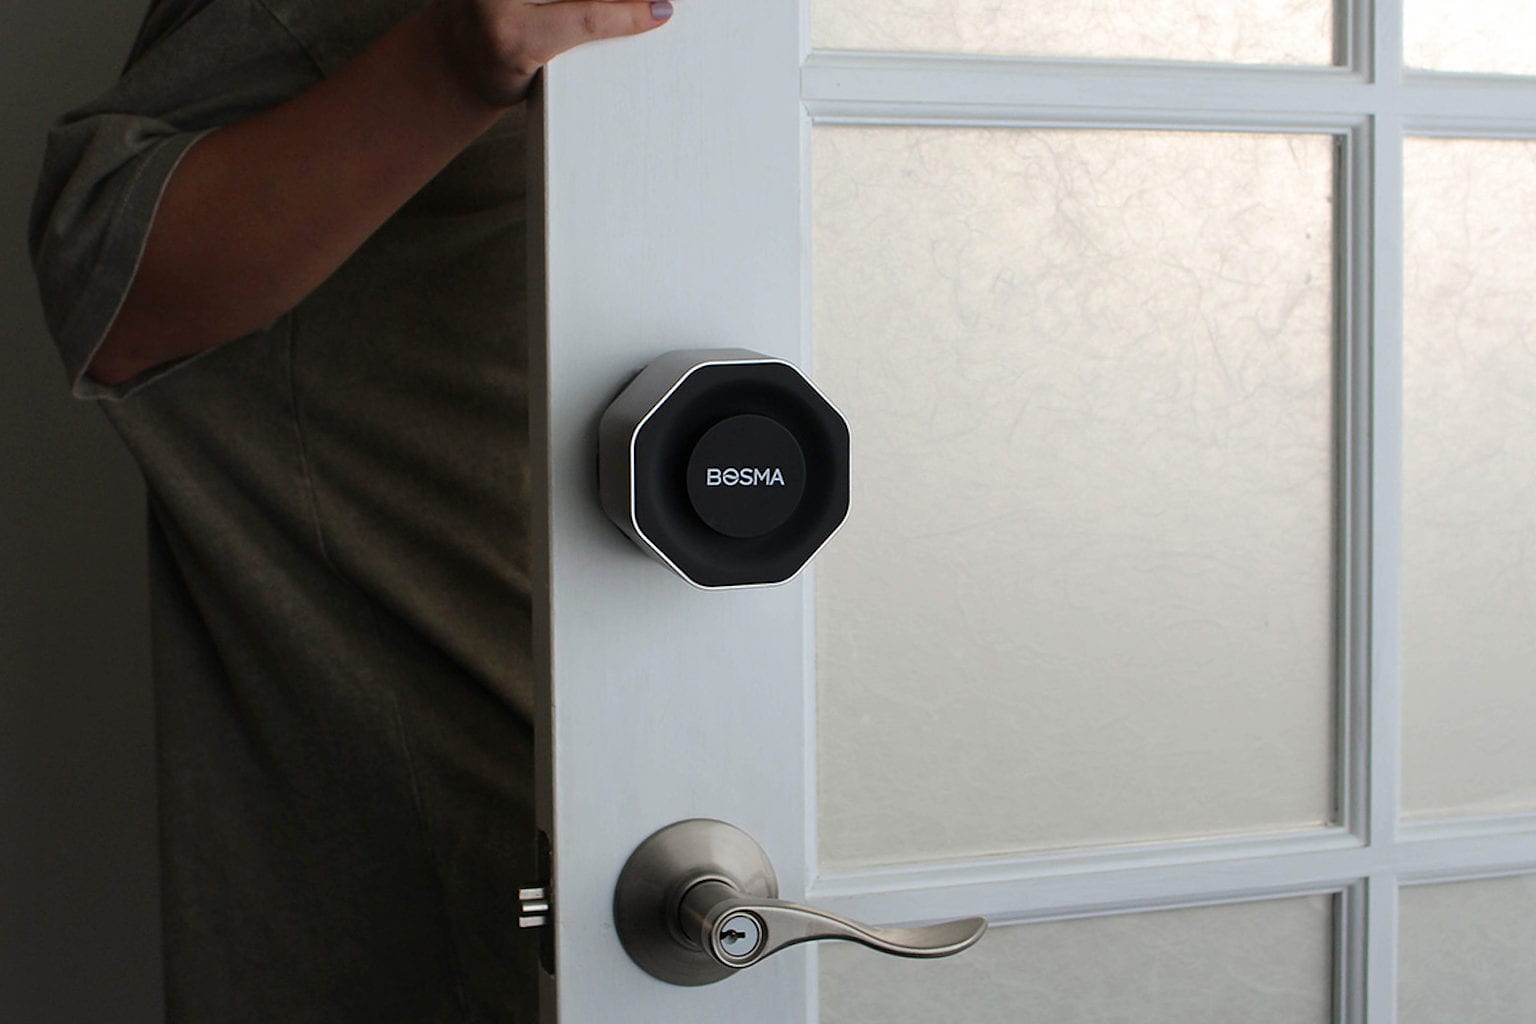 This smart door lock has five star reviews across the board - and you can grab 25% off today.